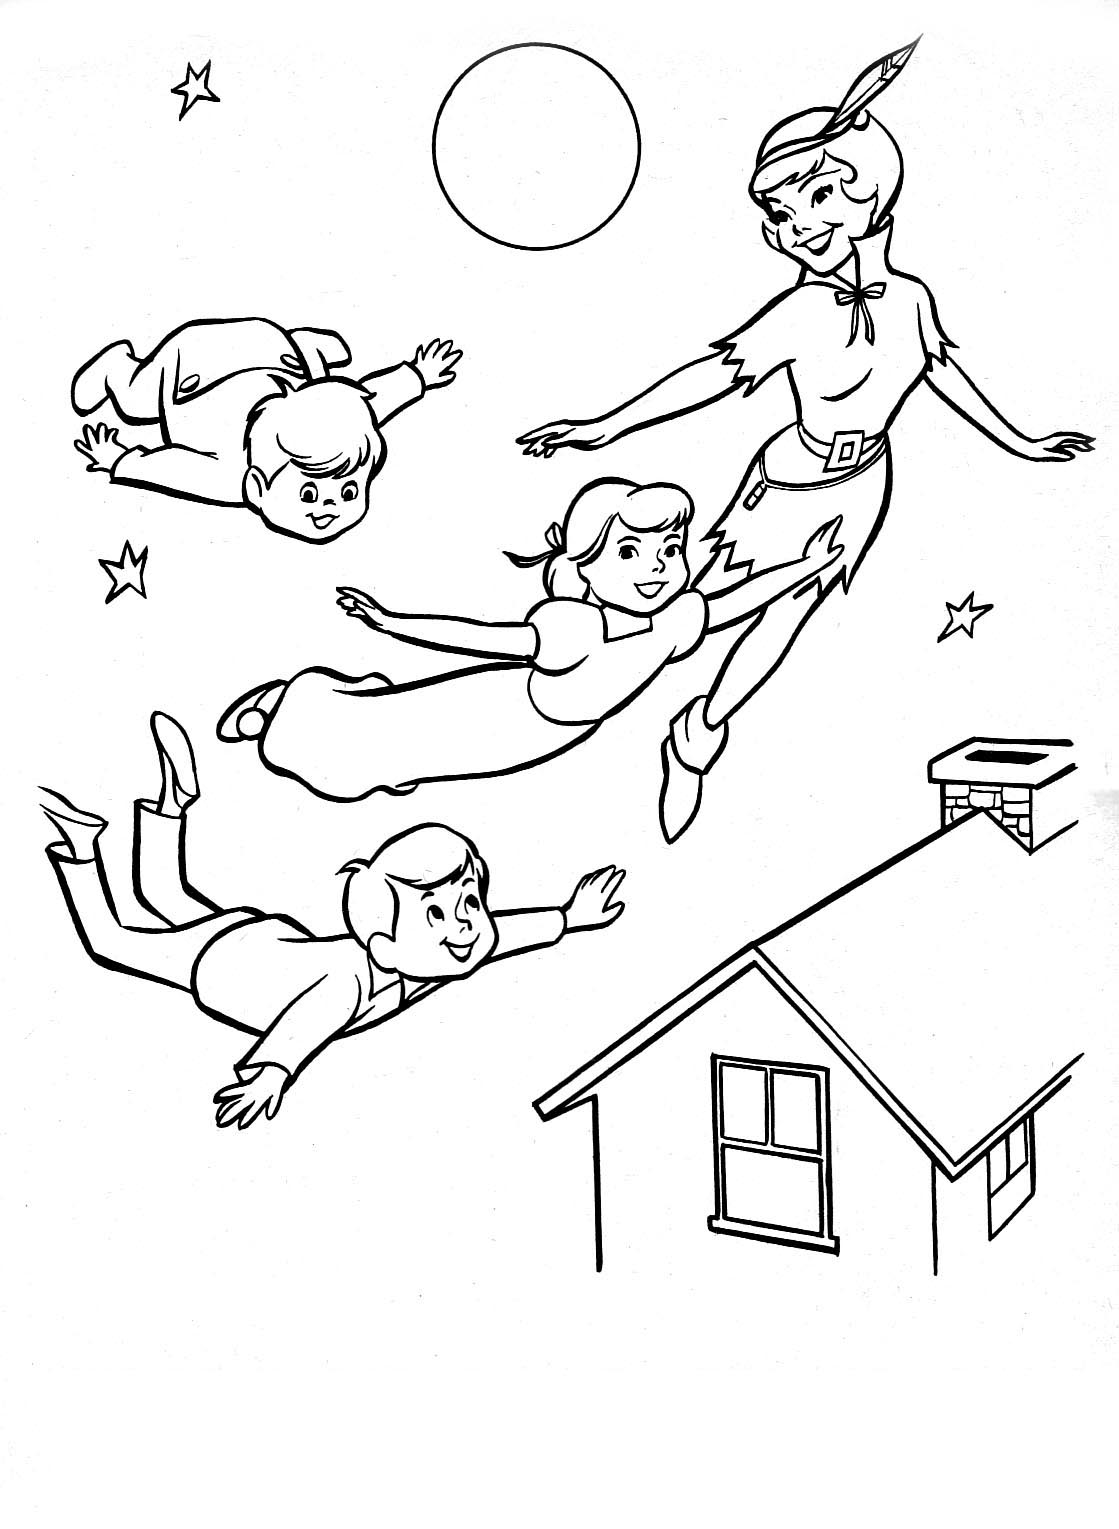 Free peter pan drawing to print and color